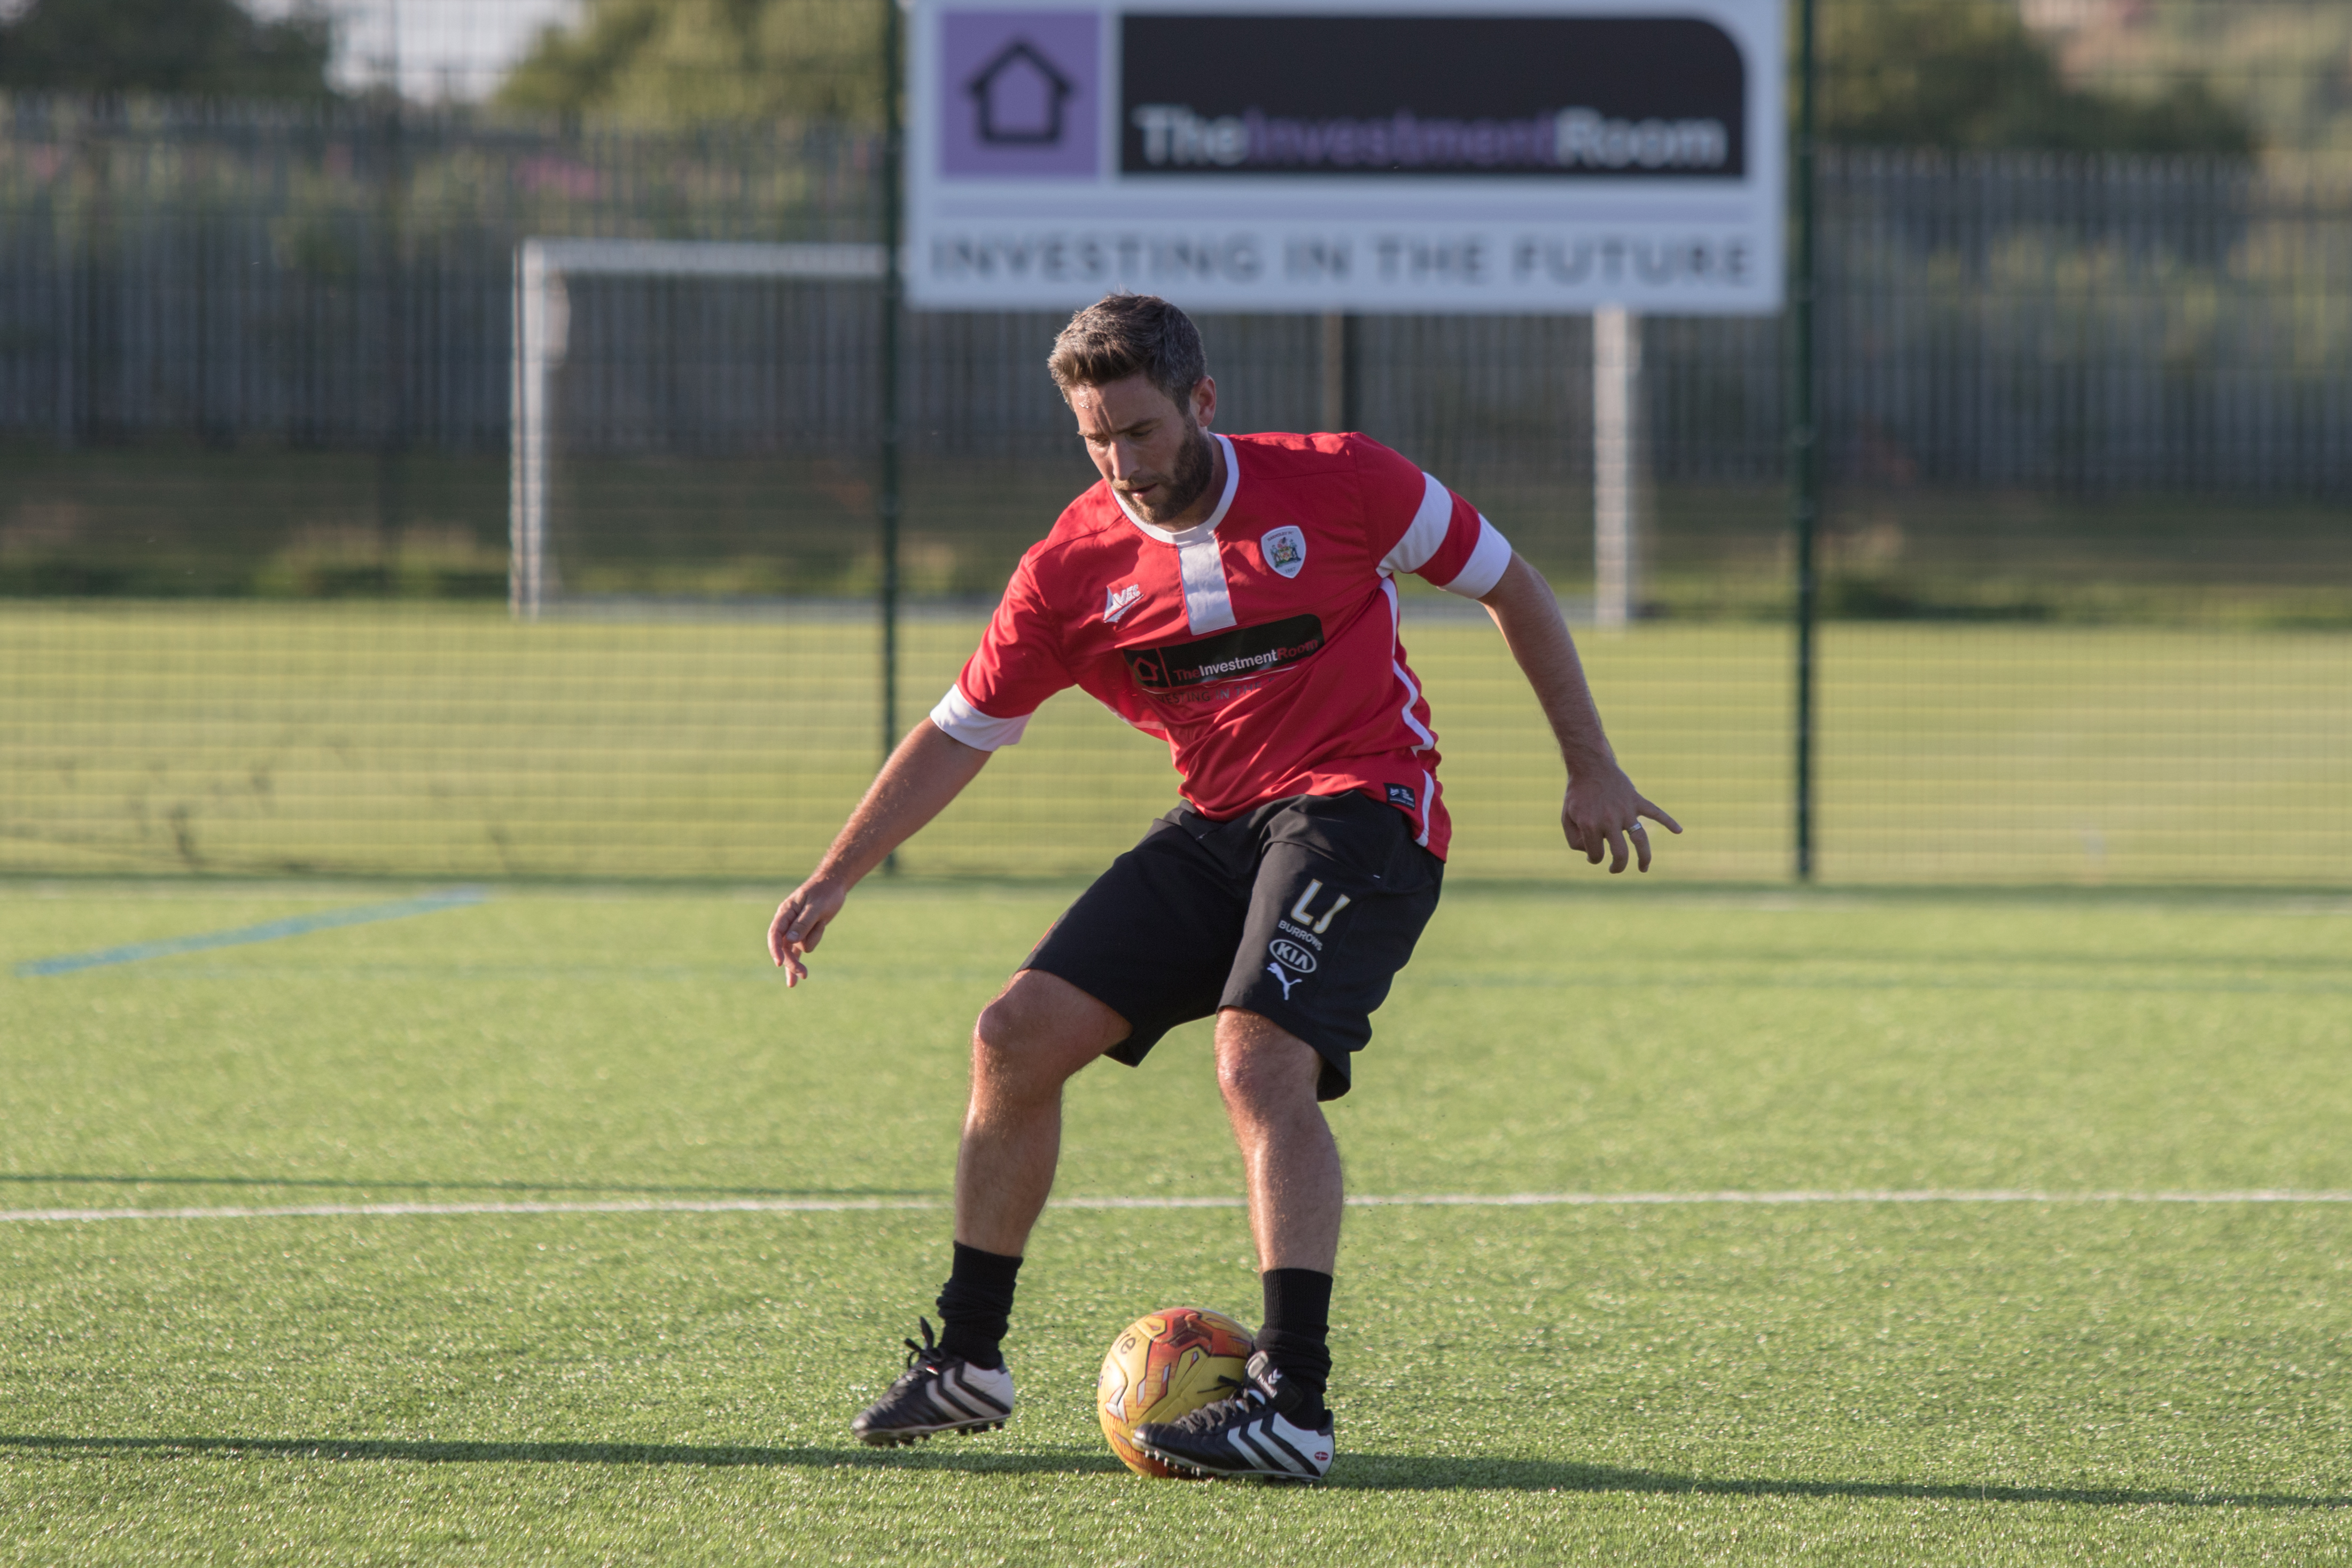 3G Floodlit Pitch Hire • Reds in the Community